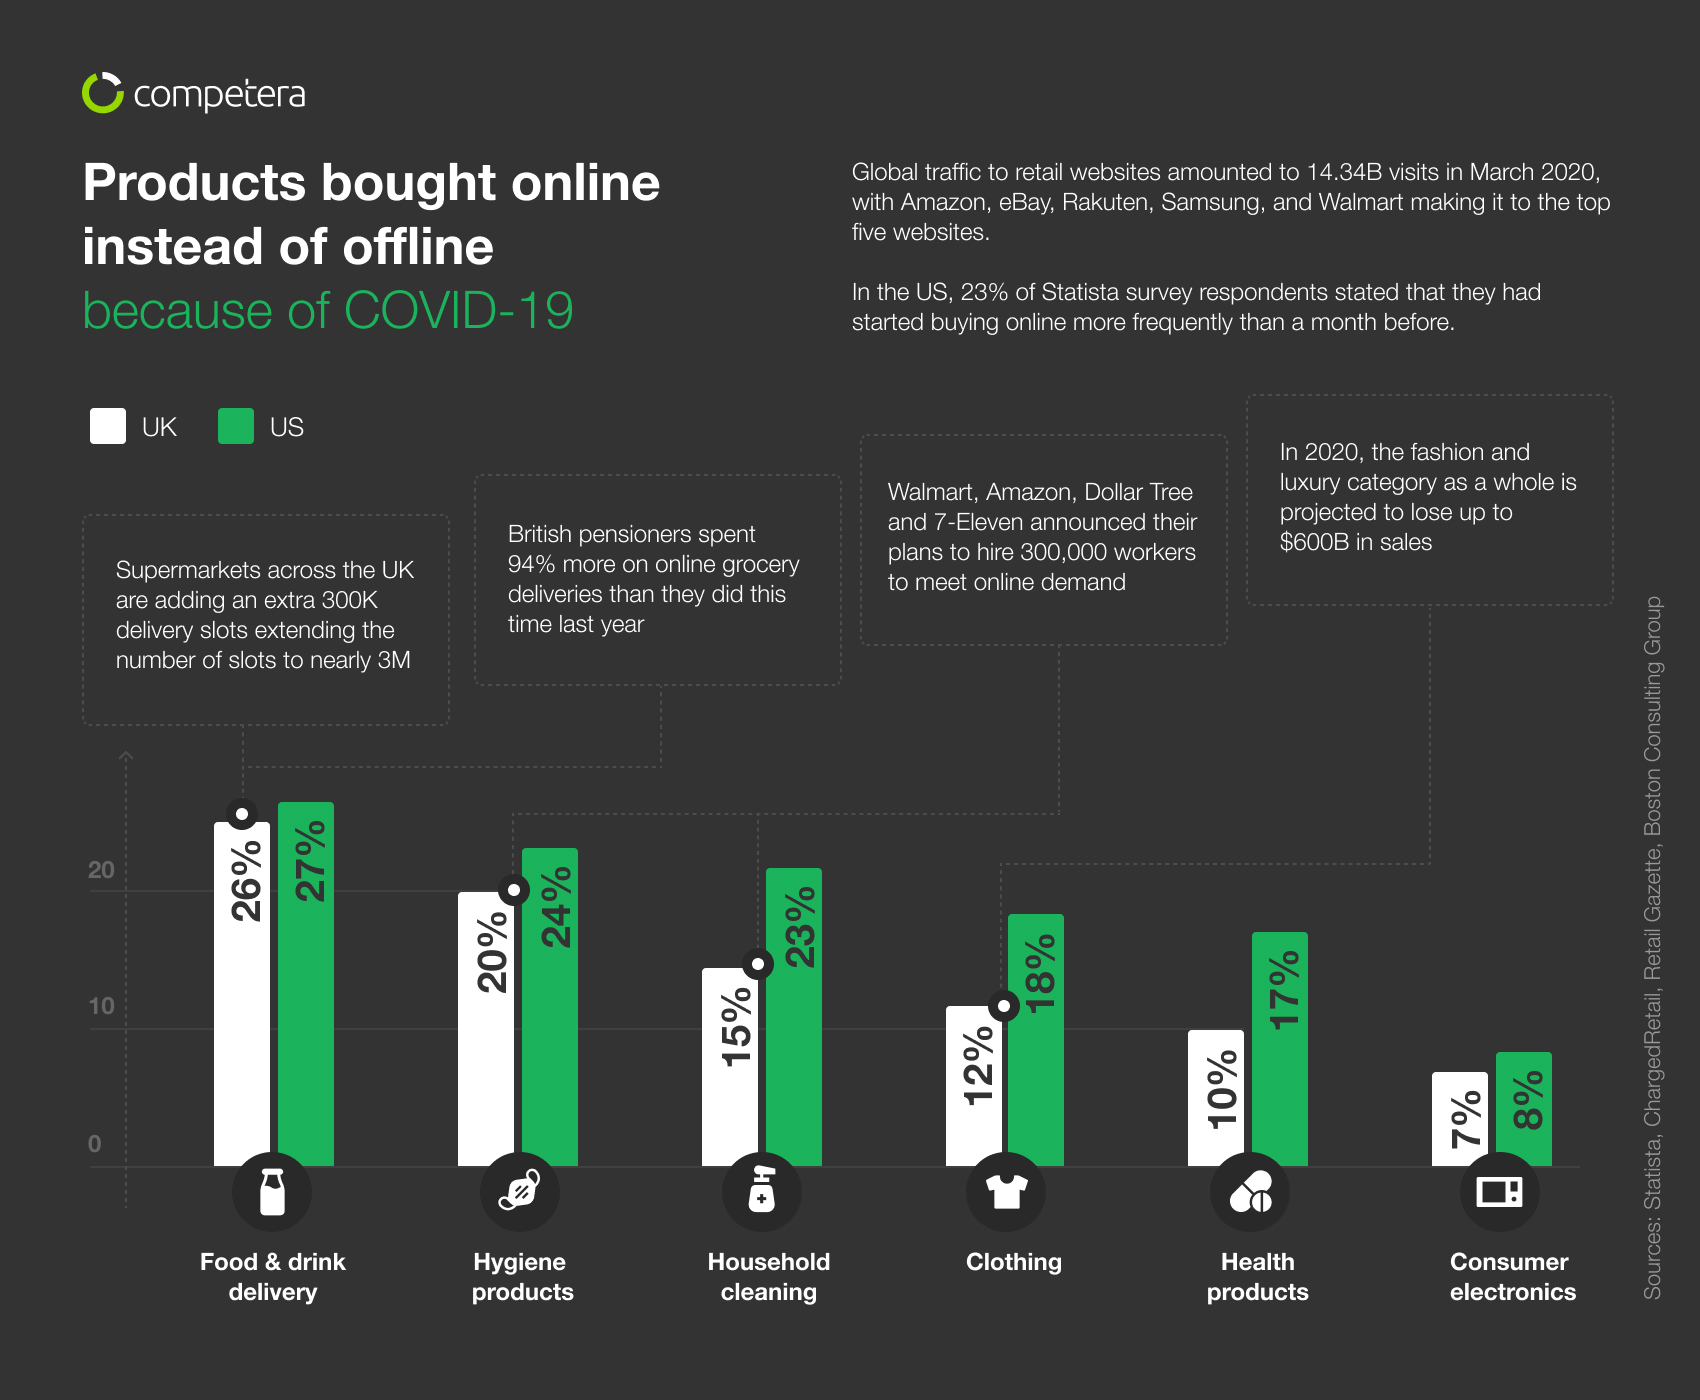 Products_bought_online-instead-offline-because-COVID-infographic-plaza